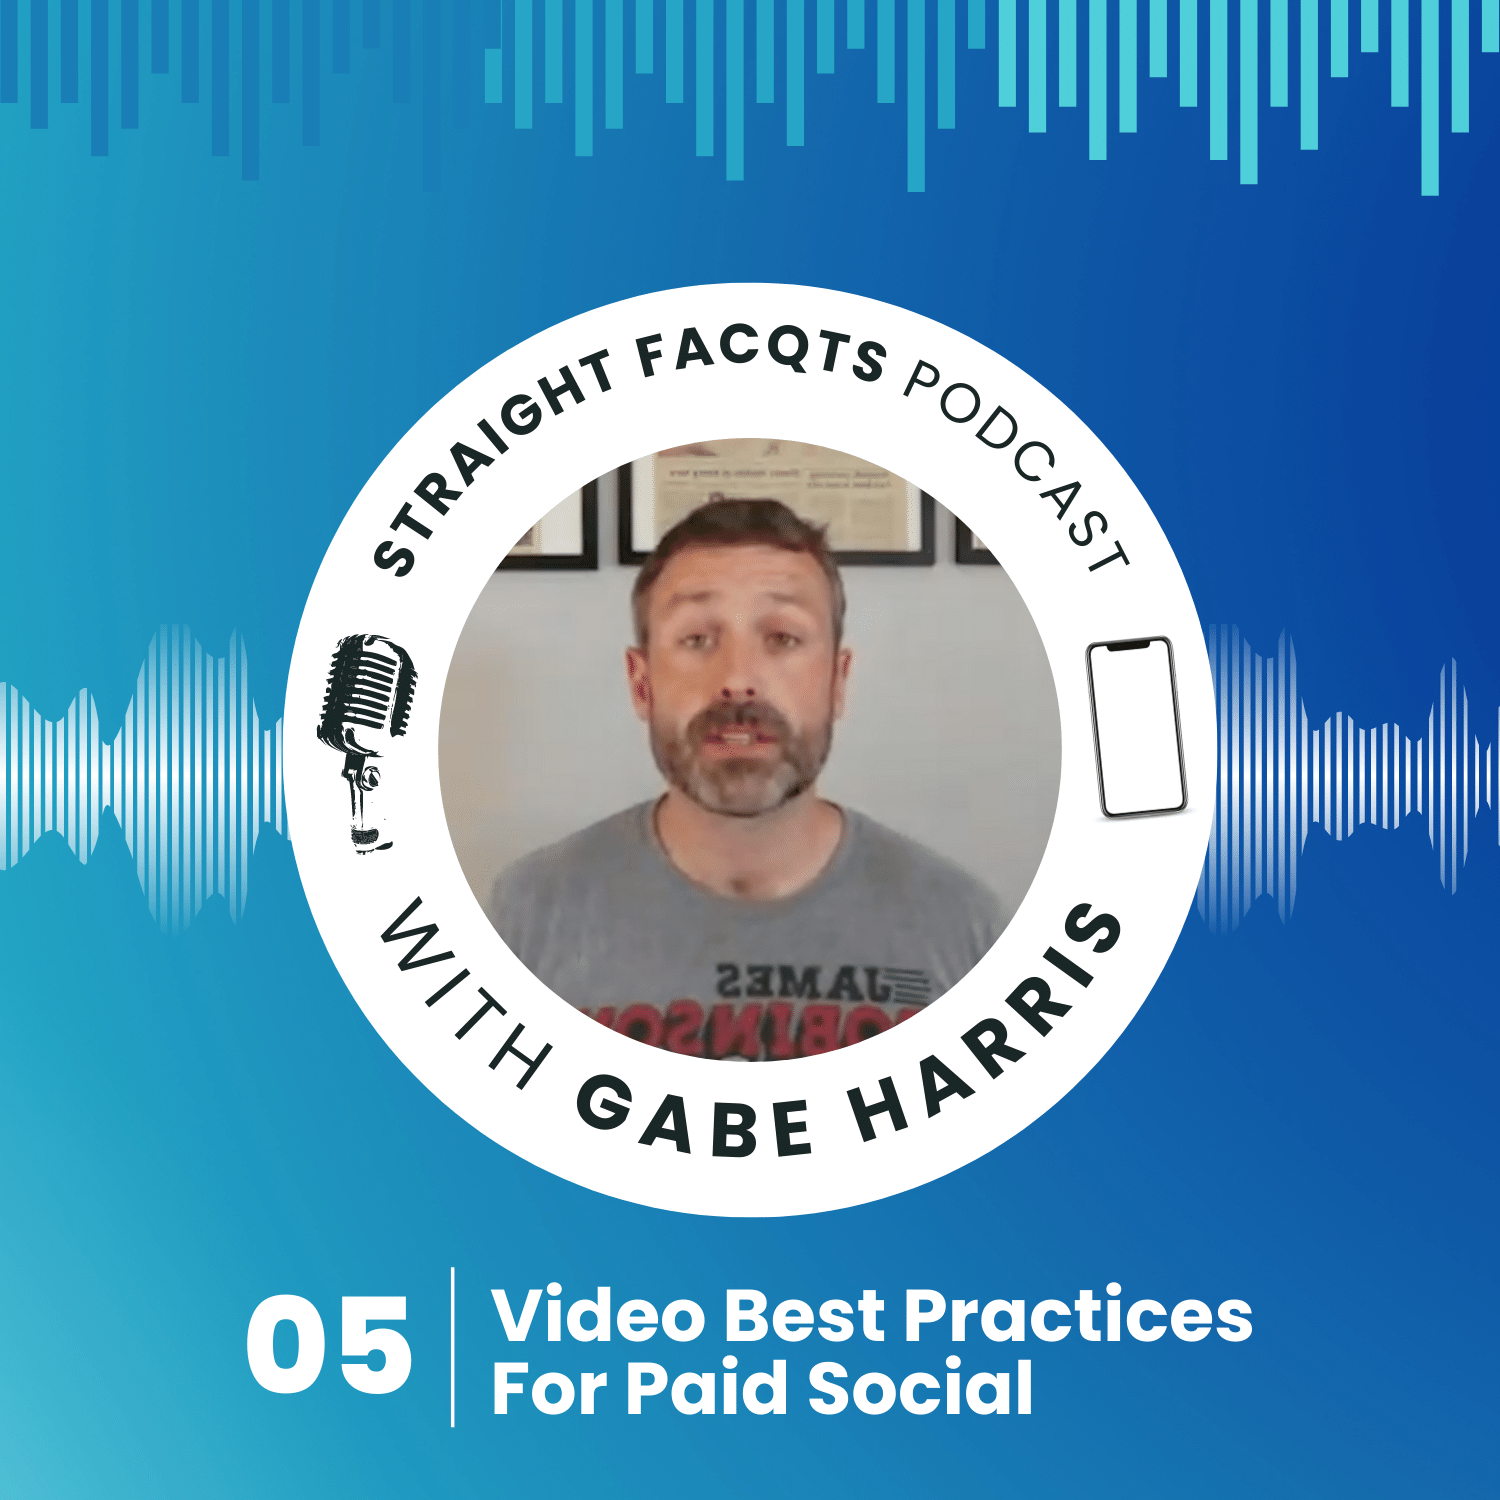 Video Best Practices For Paid Social | Straight Facqts Ep. 5